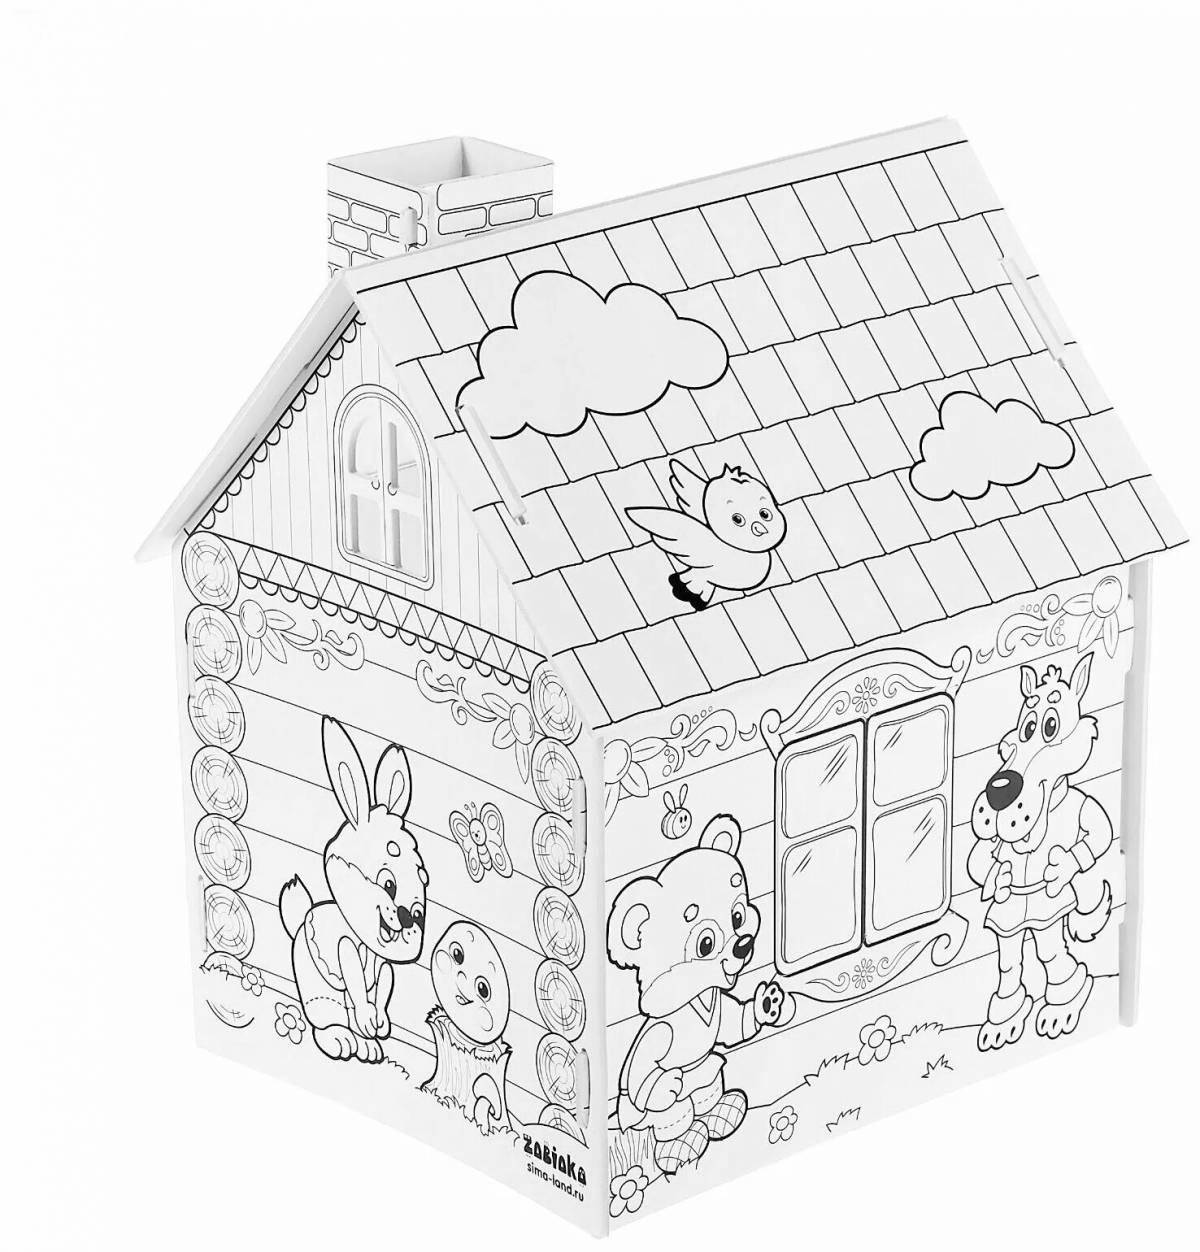 Coloring page magic cardboard house